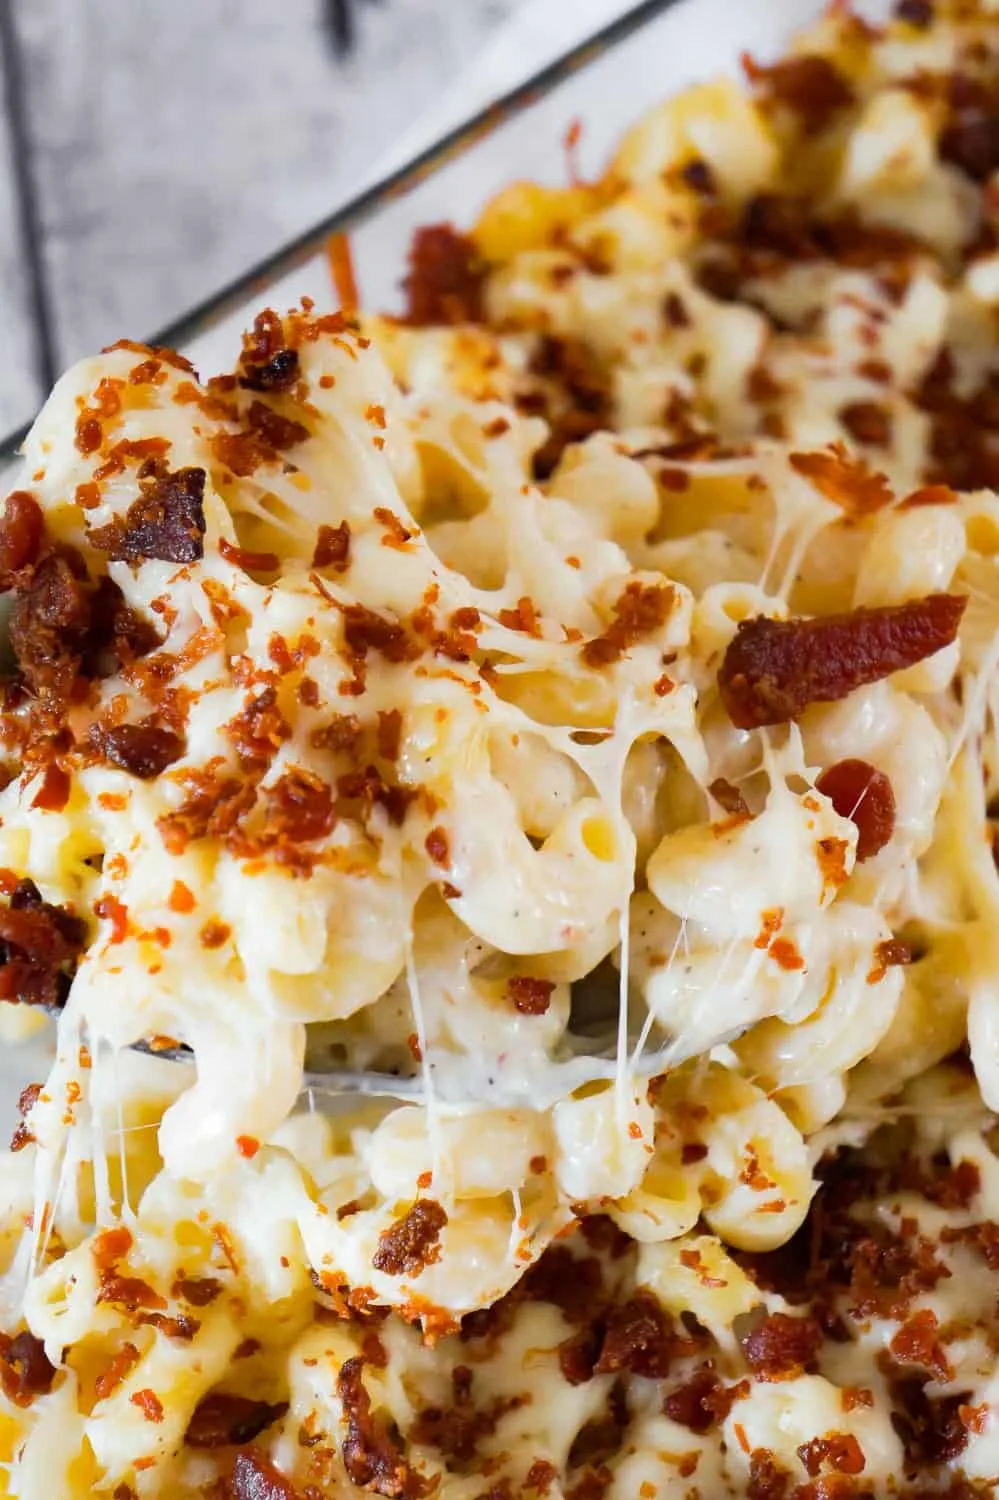 Cheesy Bacon Cavatappi Pasta is an easy and flavourful baked pasta recipe using Campbell's cream of bacon soup. This creamy pasta is loaded with Parmesan cheese, mozzarella cheese and crispy bacon.